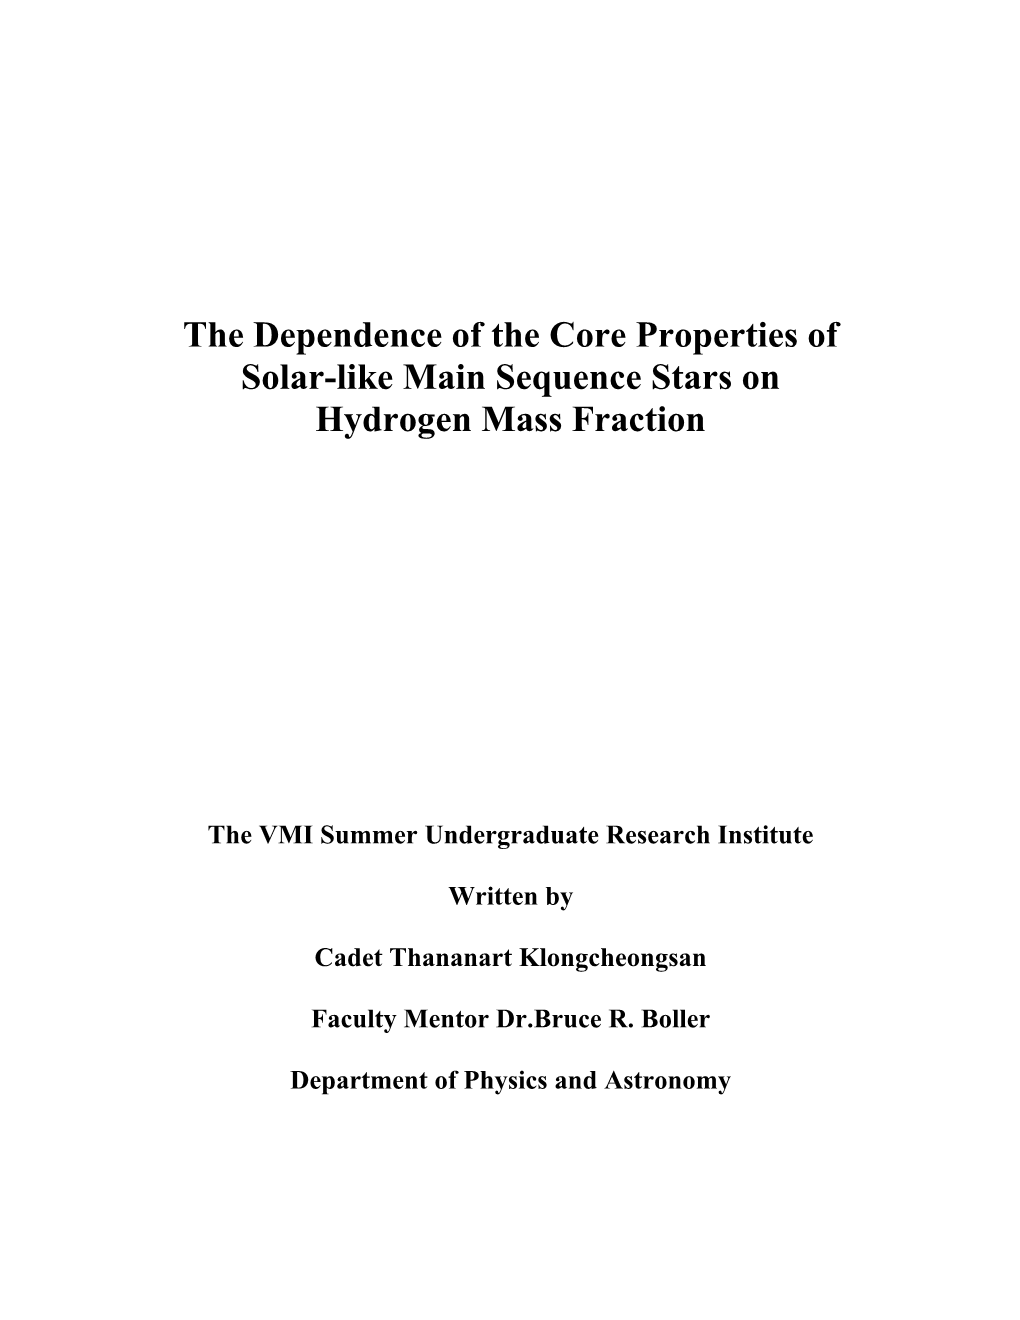 The Dependence of the Core Properties of Solar-Like Main Sequence Stars On